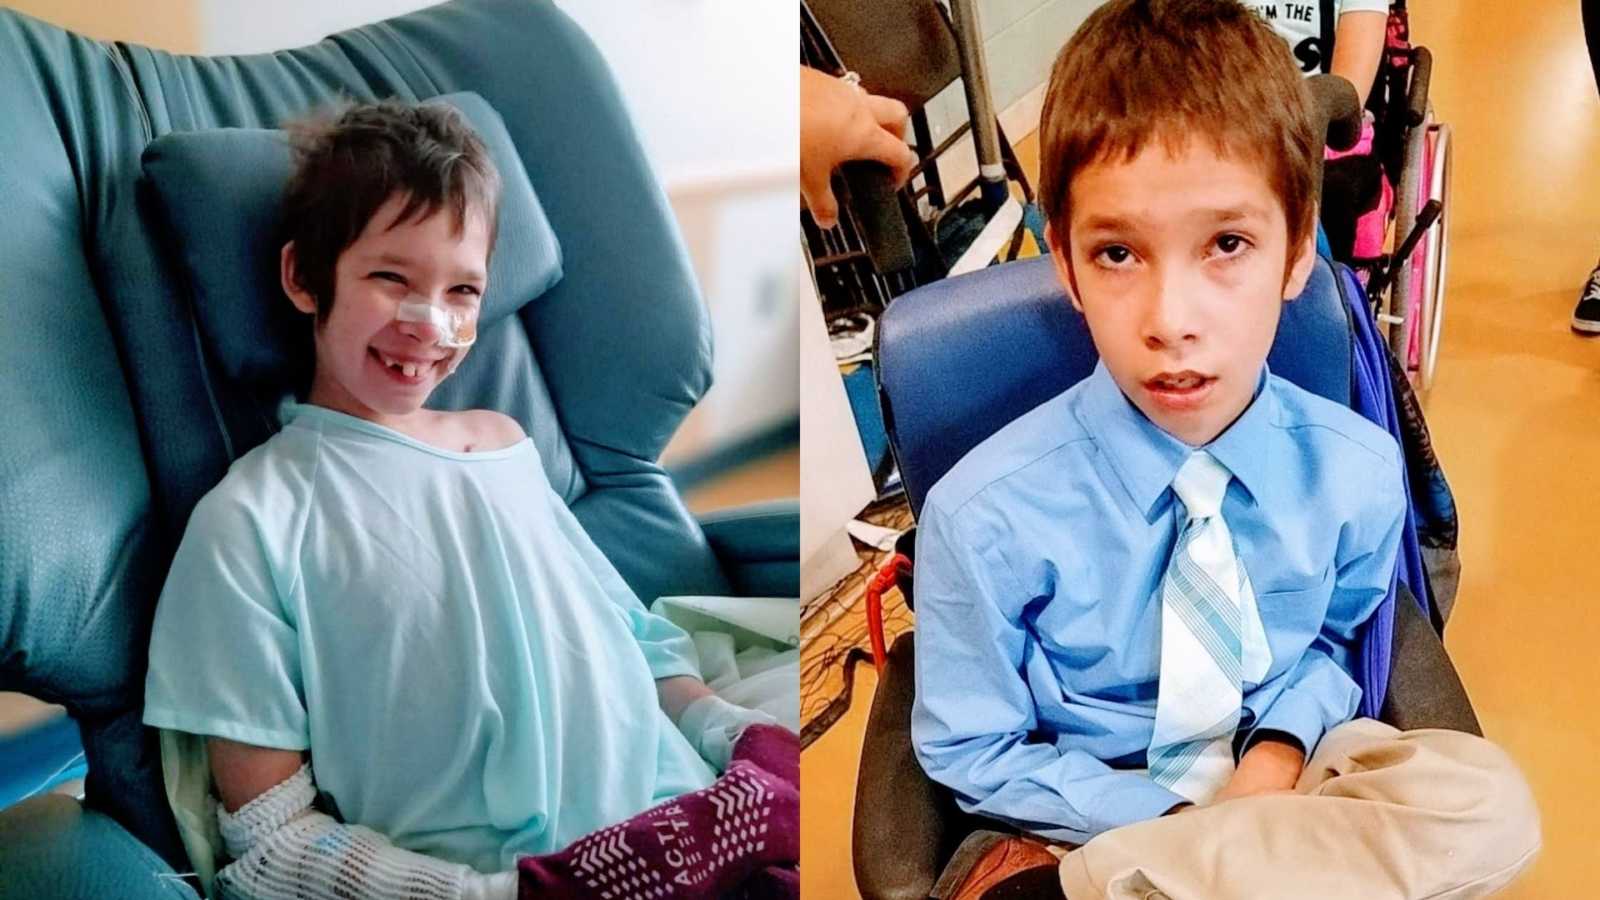 A boy sits in a hospital chair and a boy with a rare disorder sits in a shirt and tie in a wheelchair